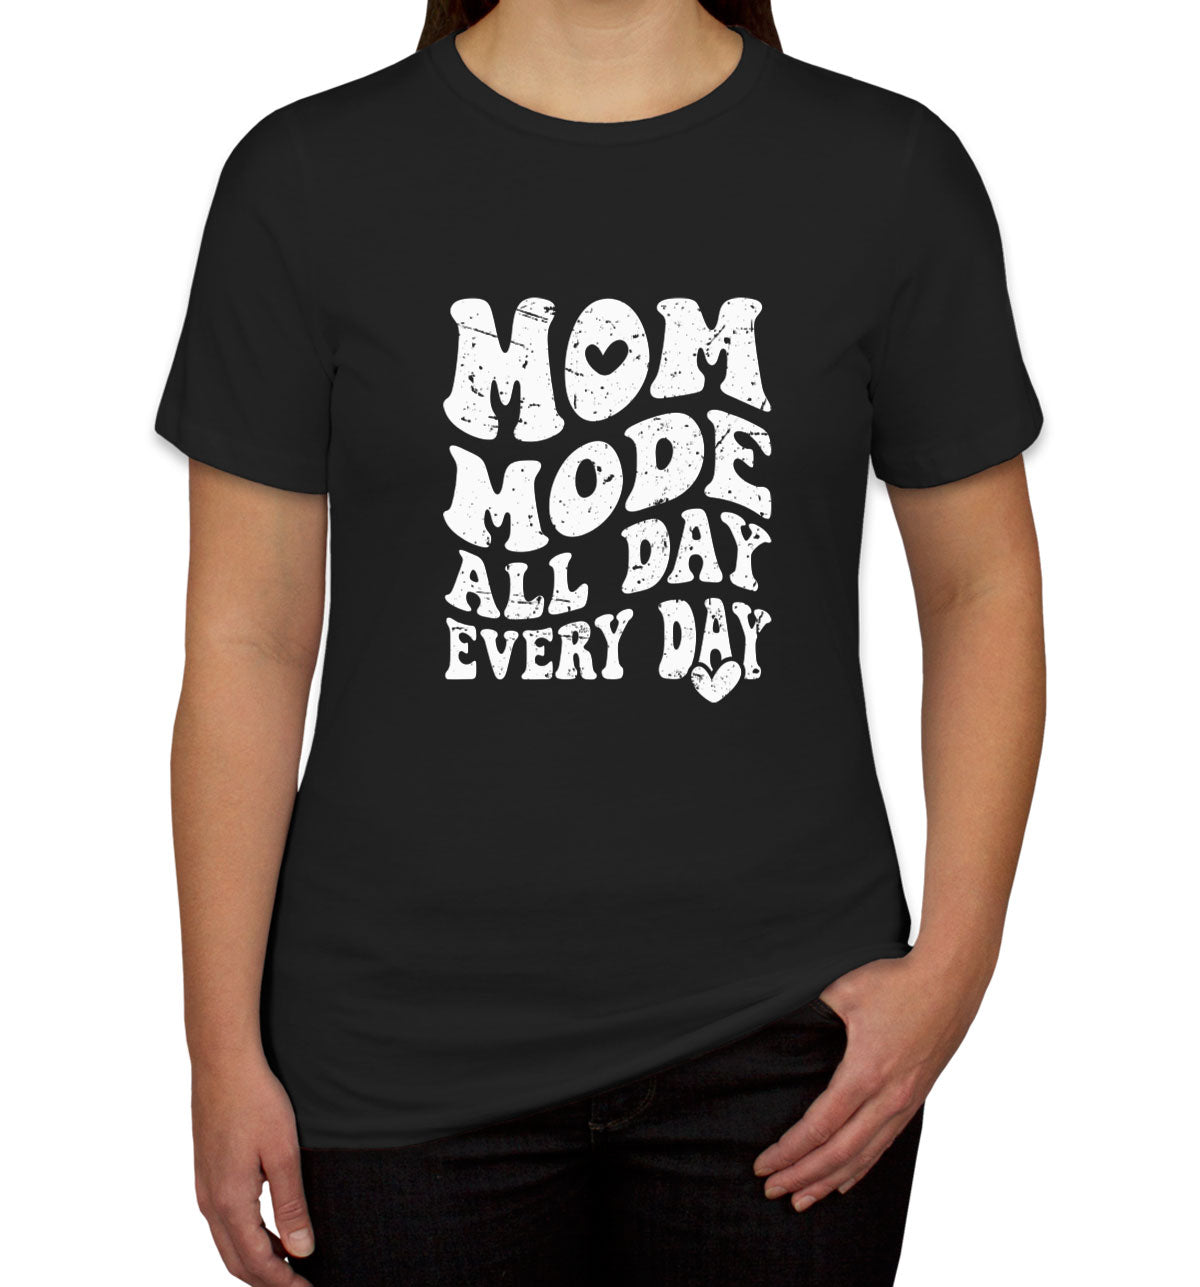 Mom Mode All Day Every Day Mother's Day Women's T-shirt